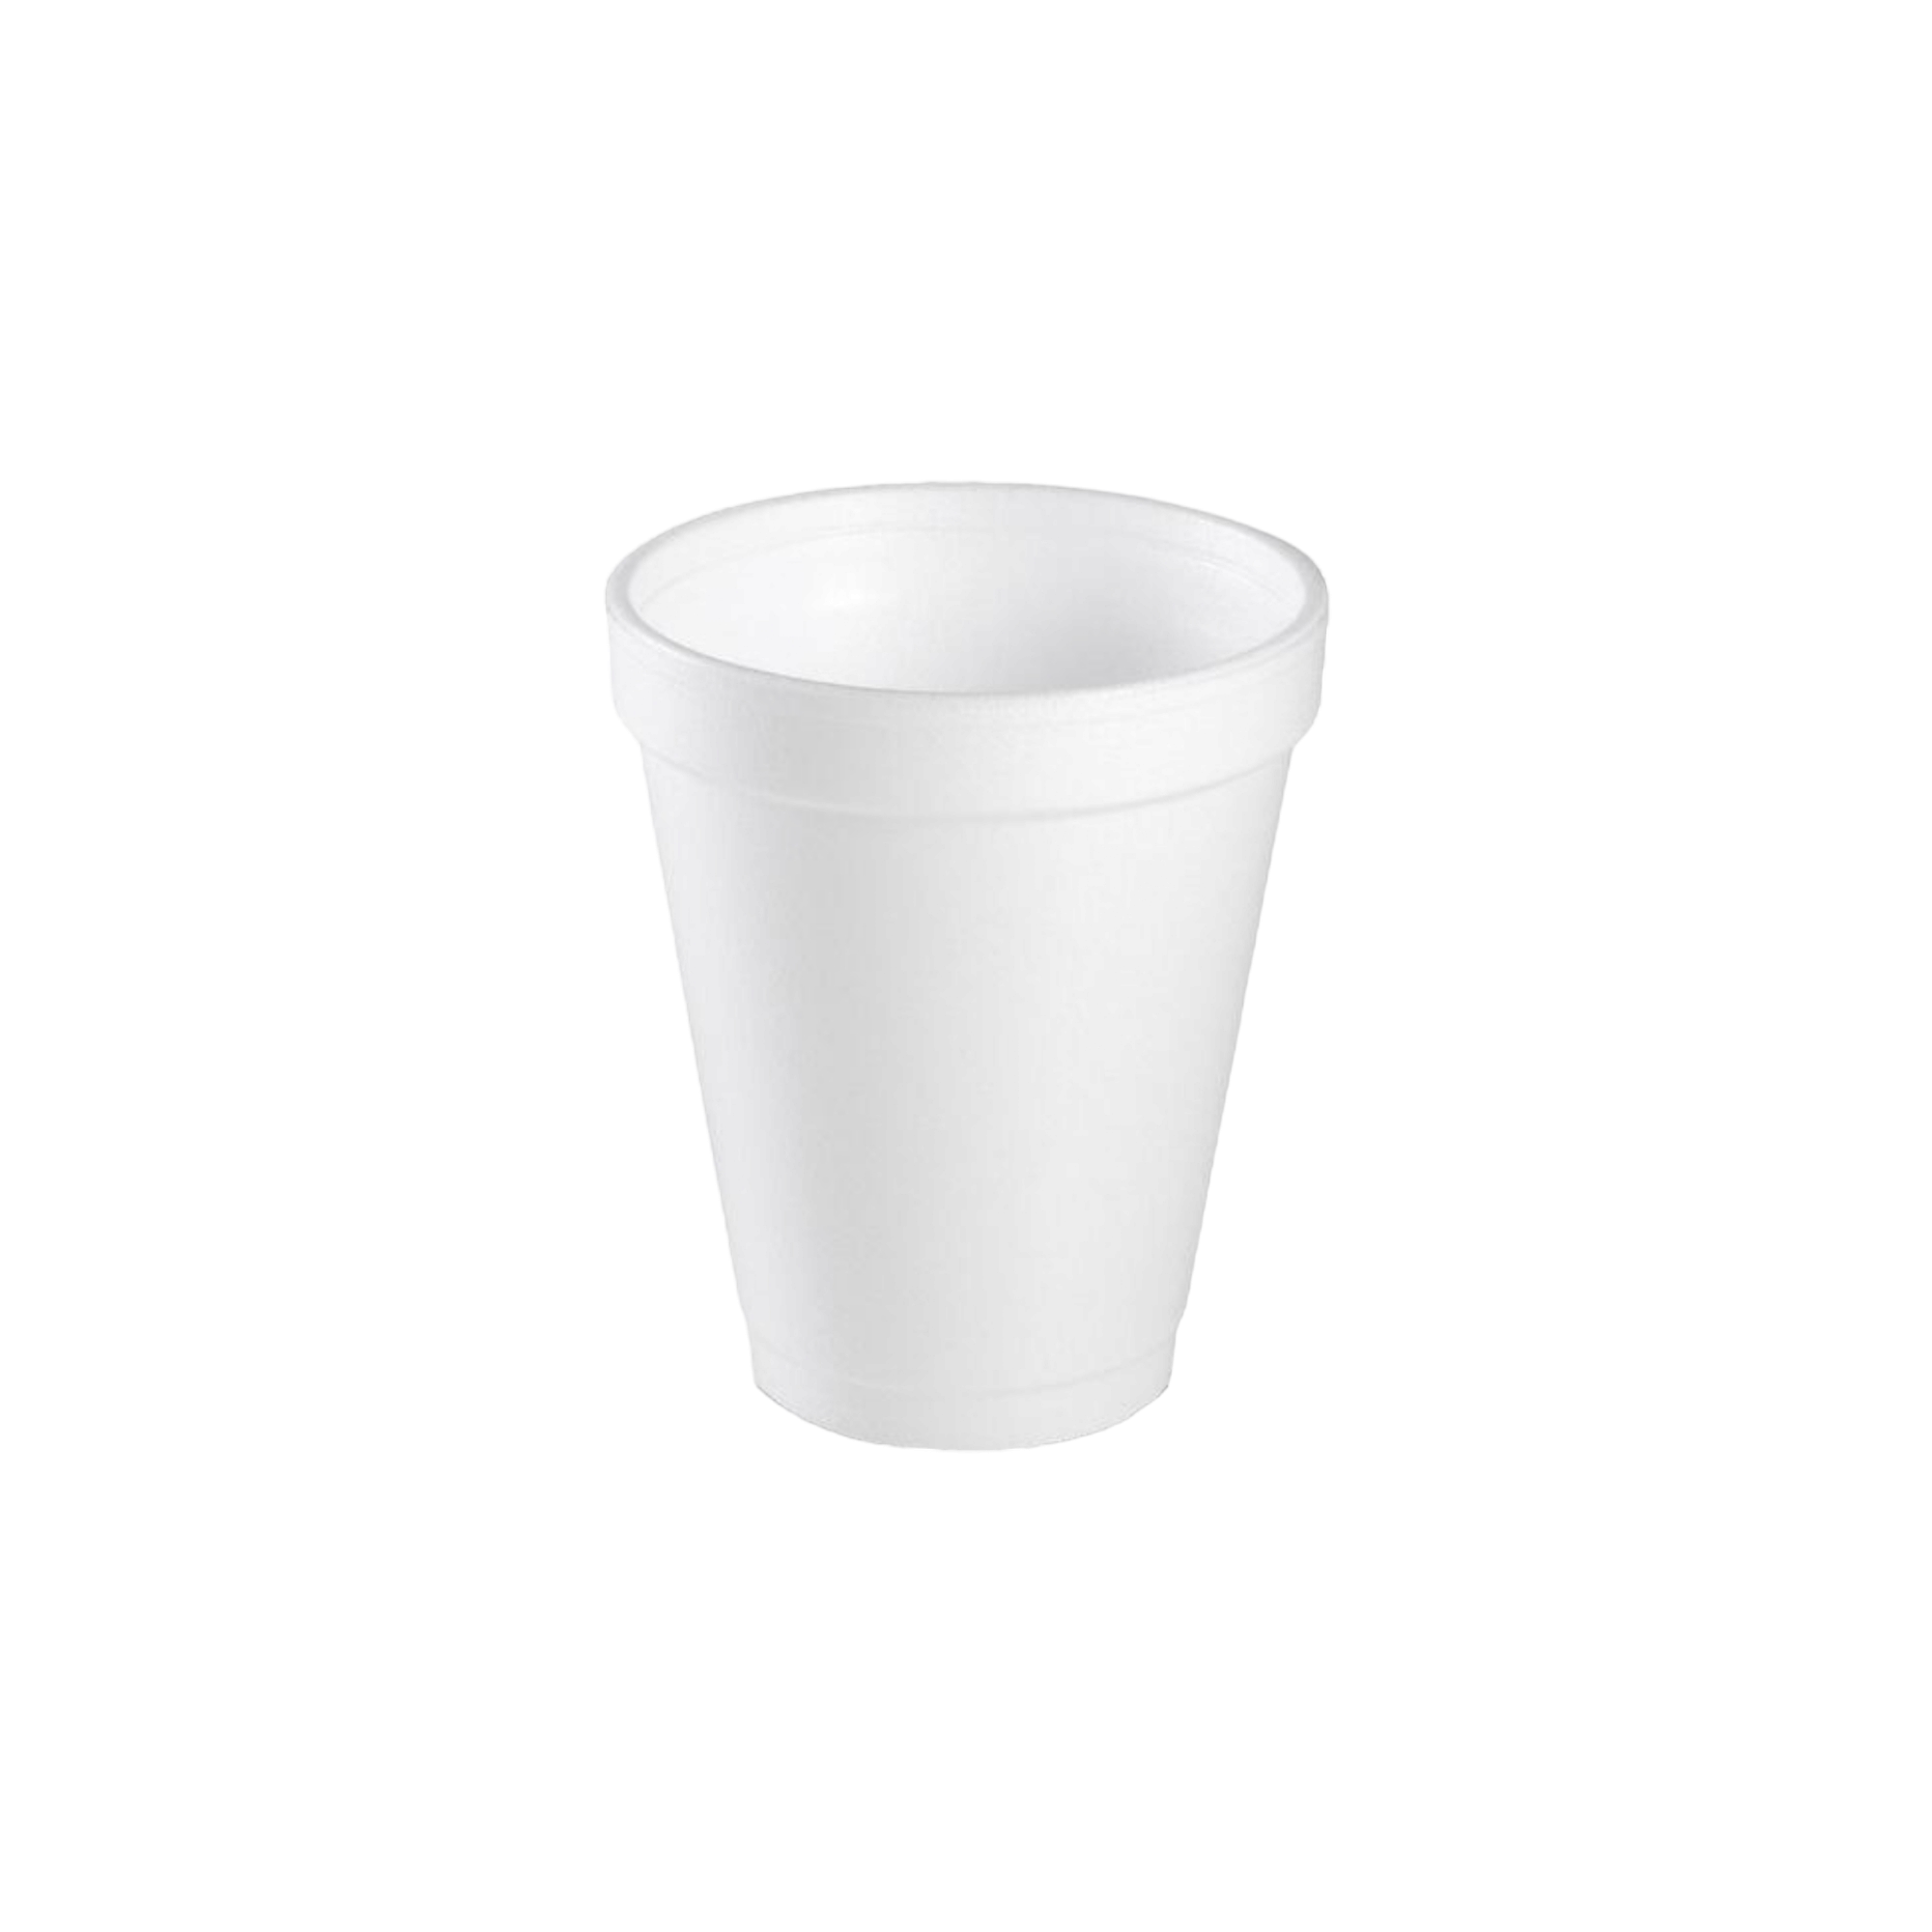 125ml Foam Cups Polystyrene HC.4 Disposable 100pack